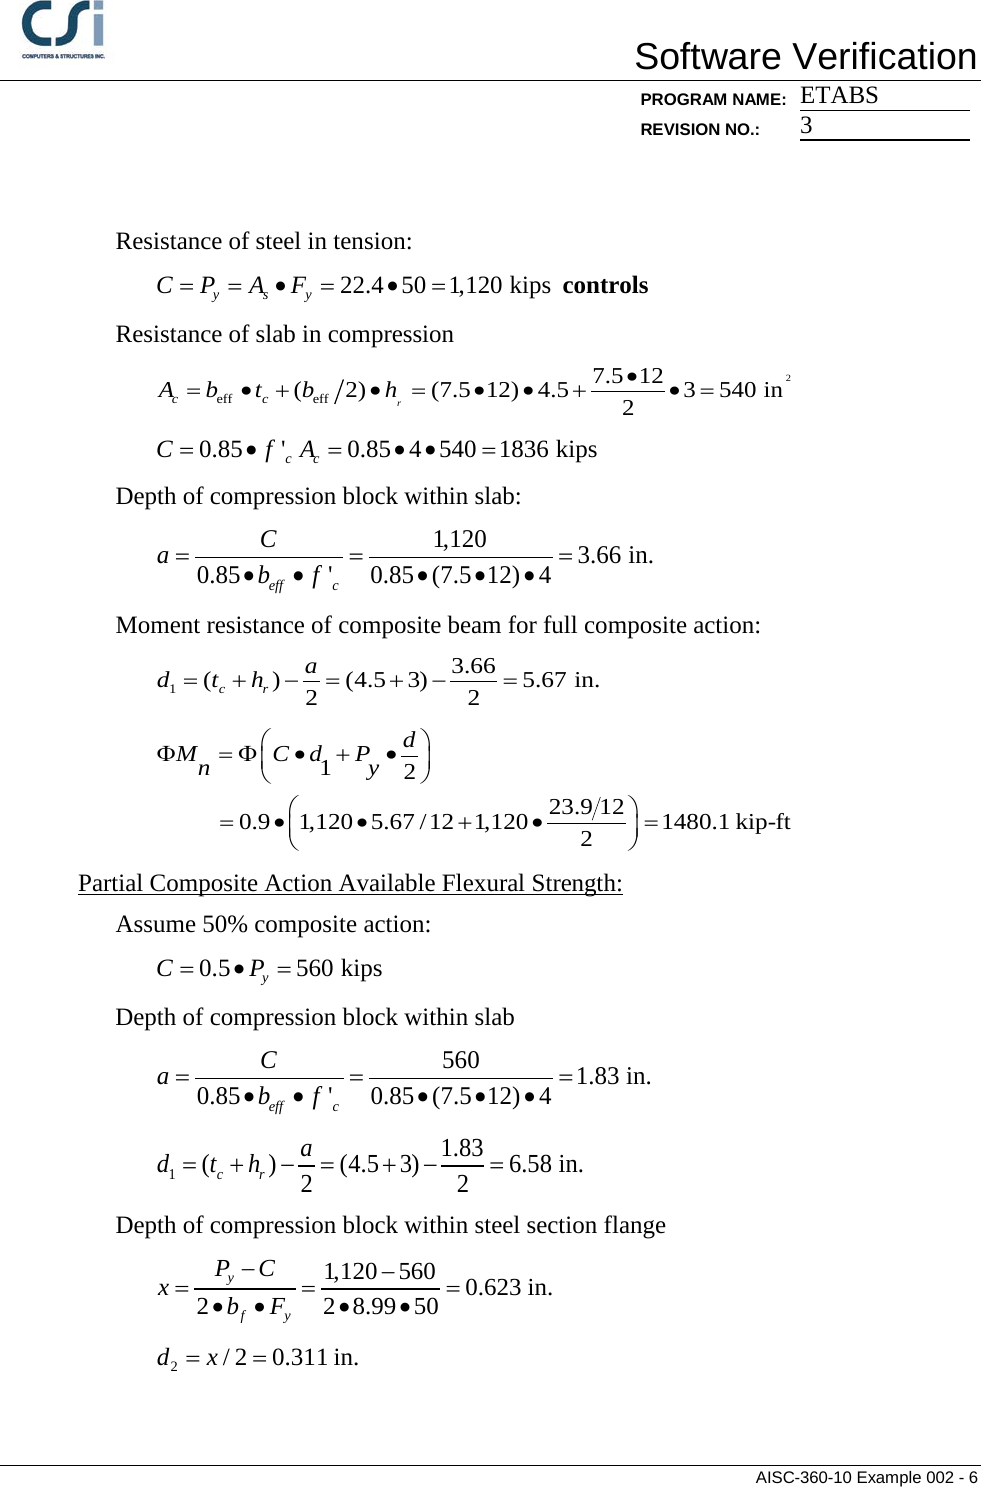 Page 6 of 8 - Contents AISC-360-10 Example 002